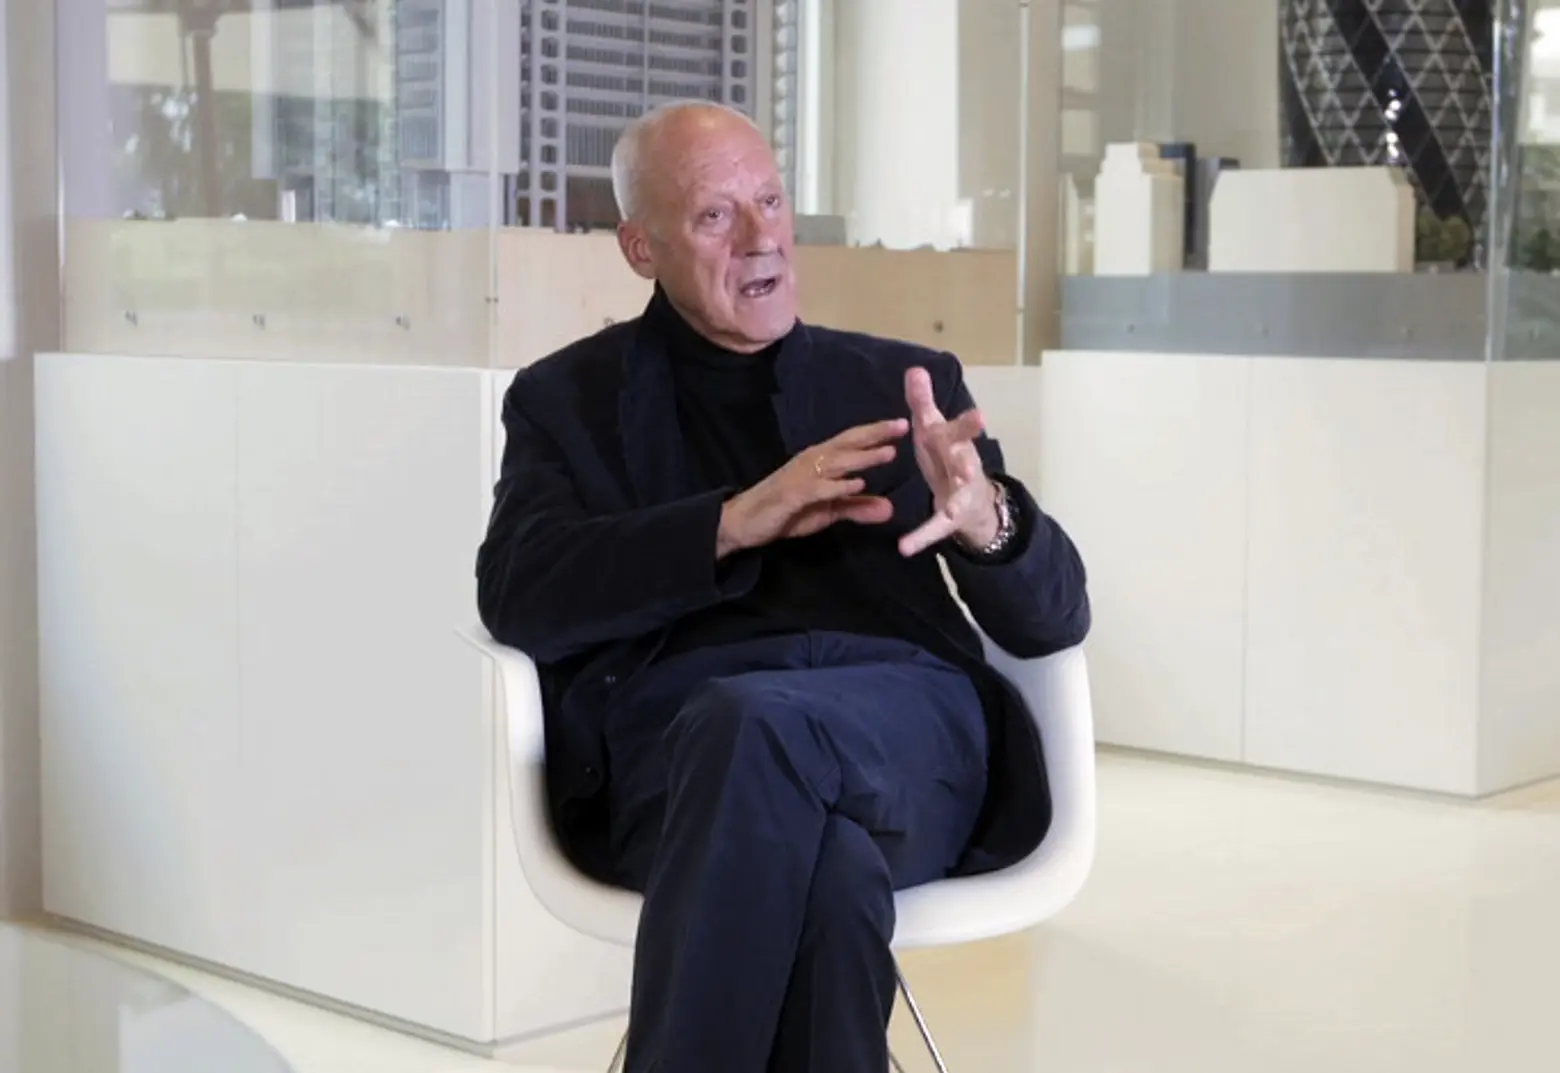 VIDEO: Starchitect Norman Foster Offers Up Some Sage Career Advice